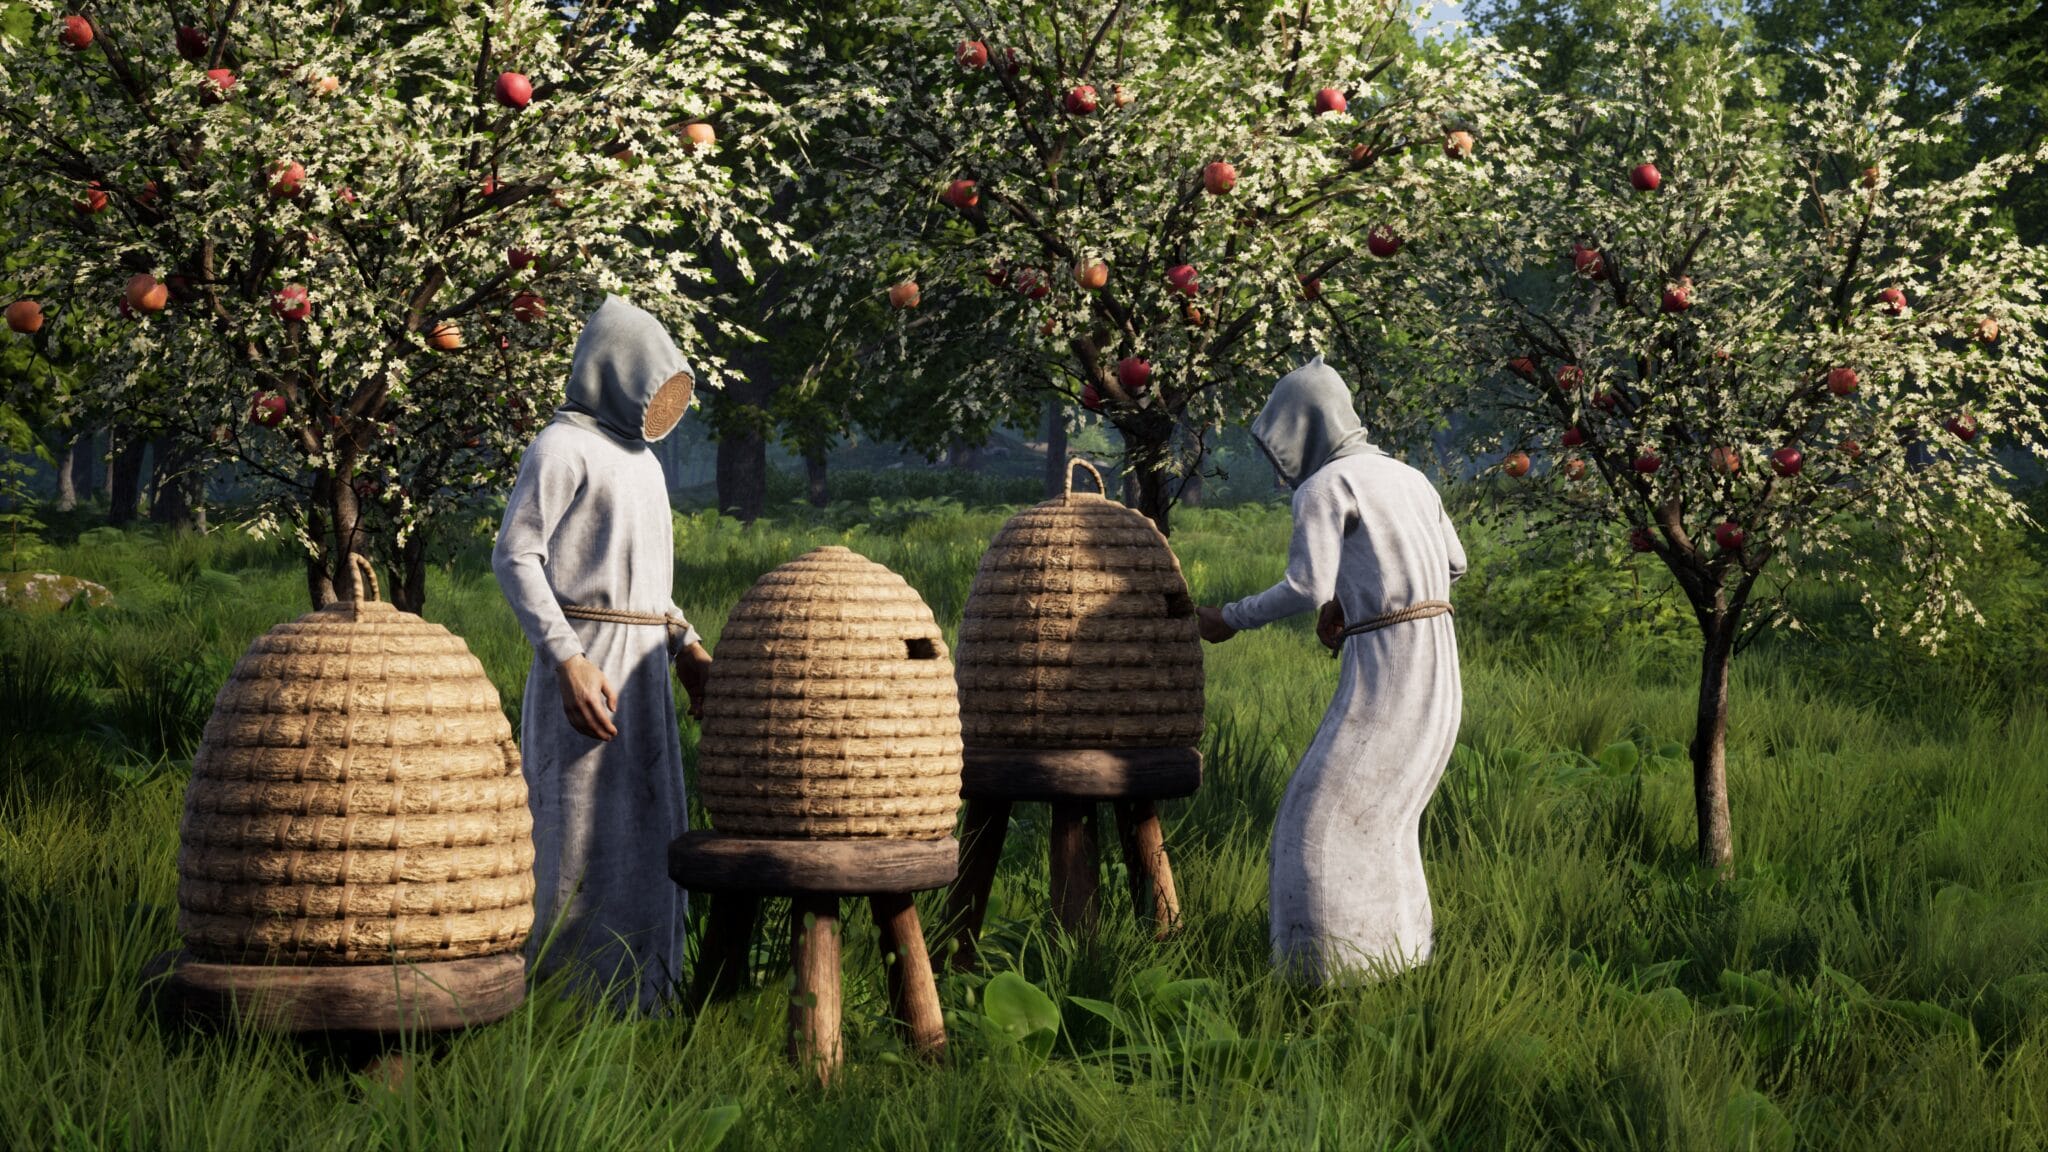 One of the first new features was beekeeping - of course only with the right equipment. Even in the Middle Ages, bee stings were unpleasant.